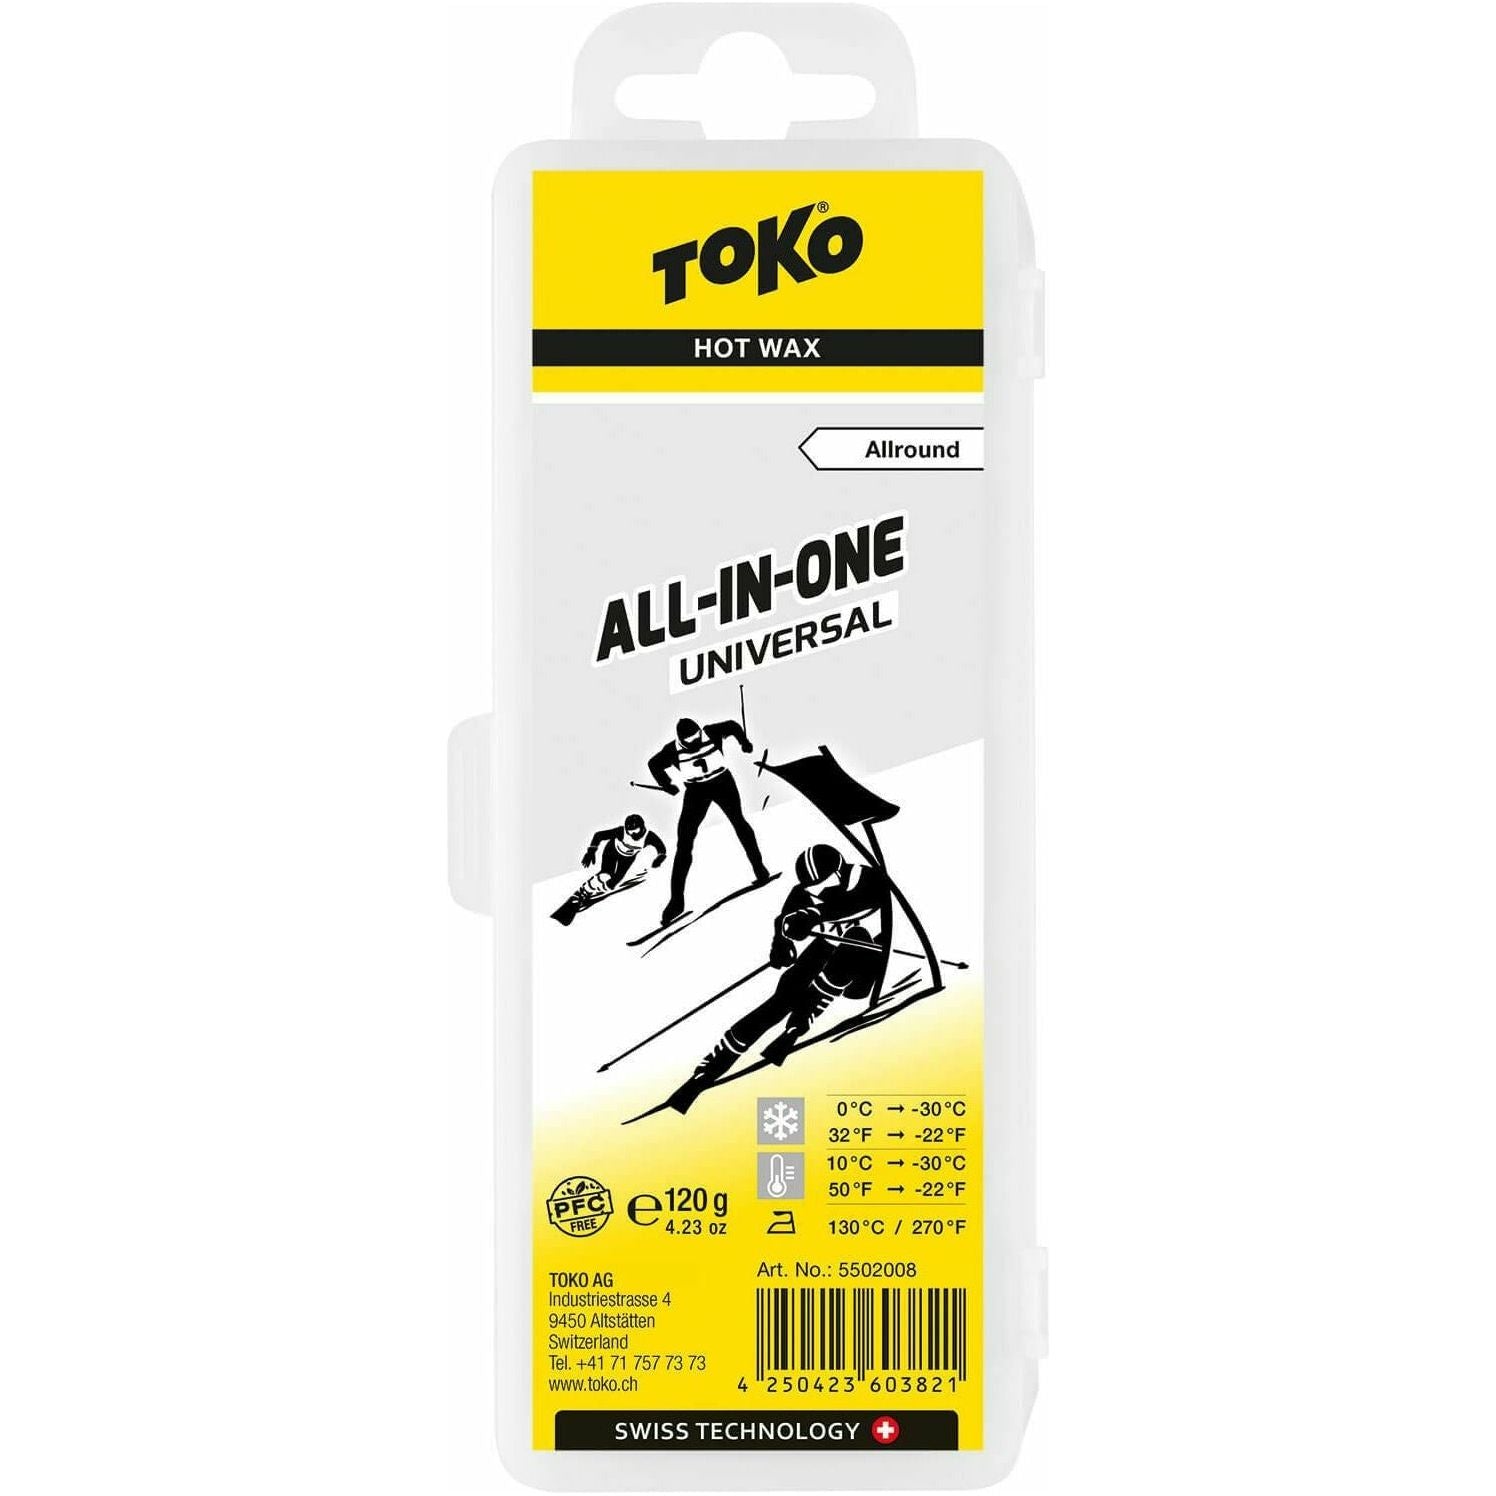 Toko All-in-one Hot Wax